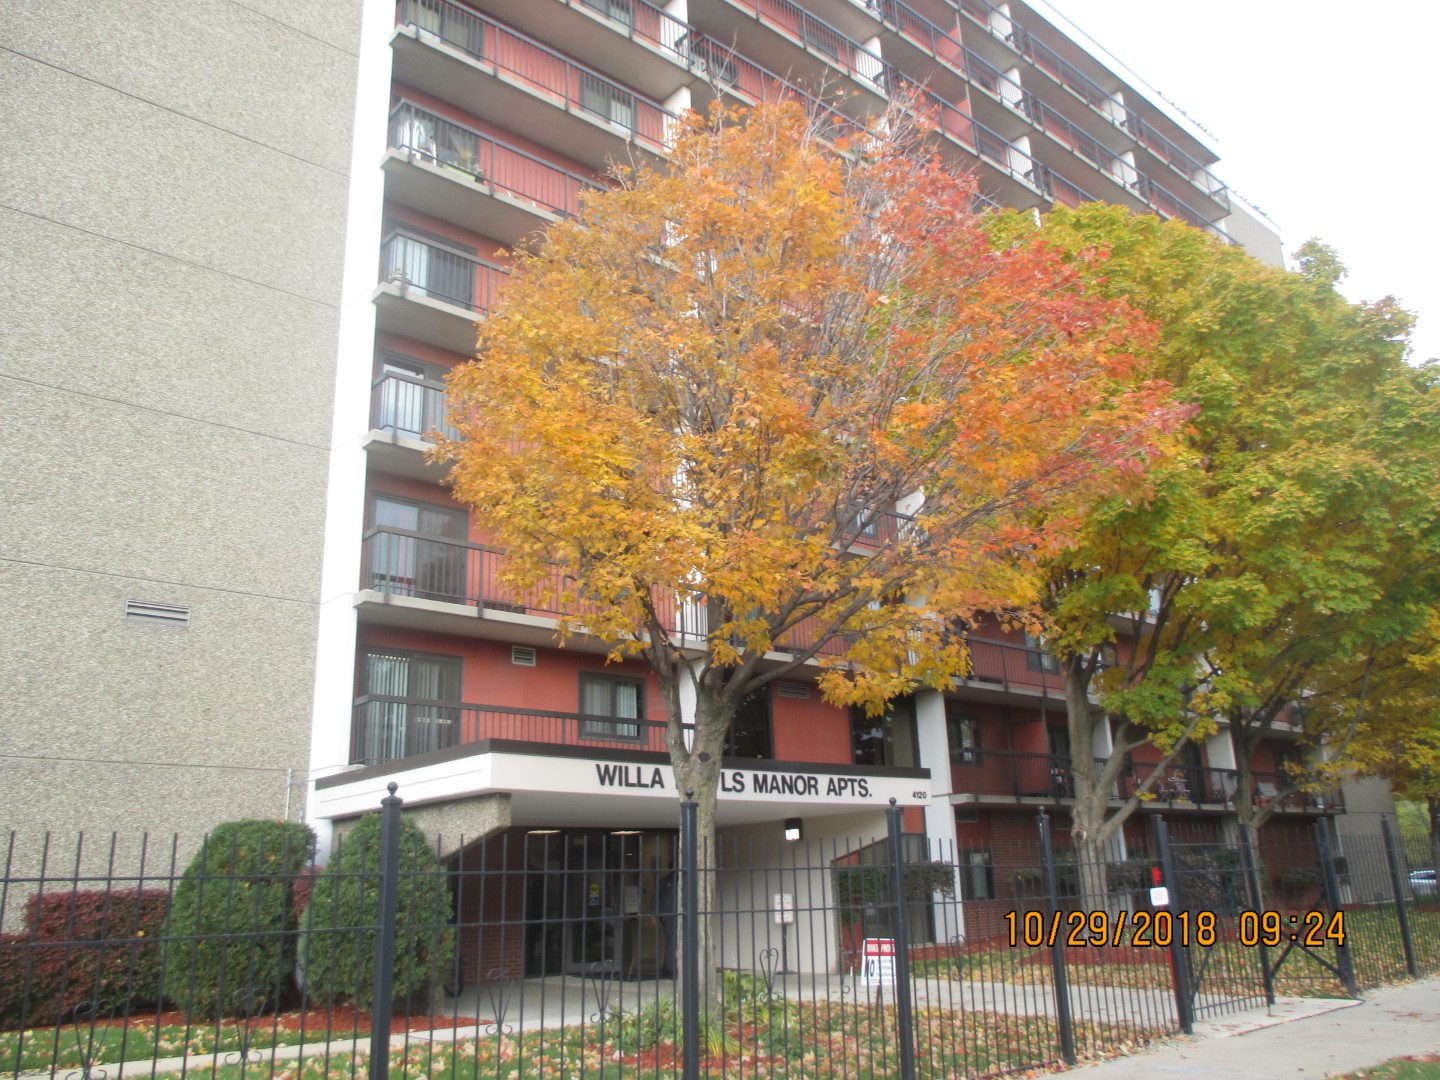 Exterior of multifamily building with large trees in front